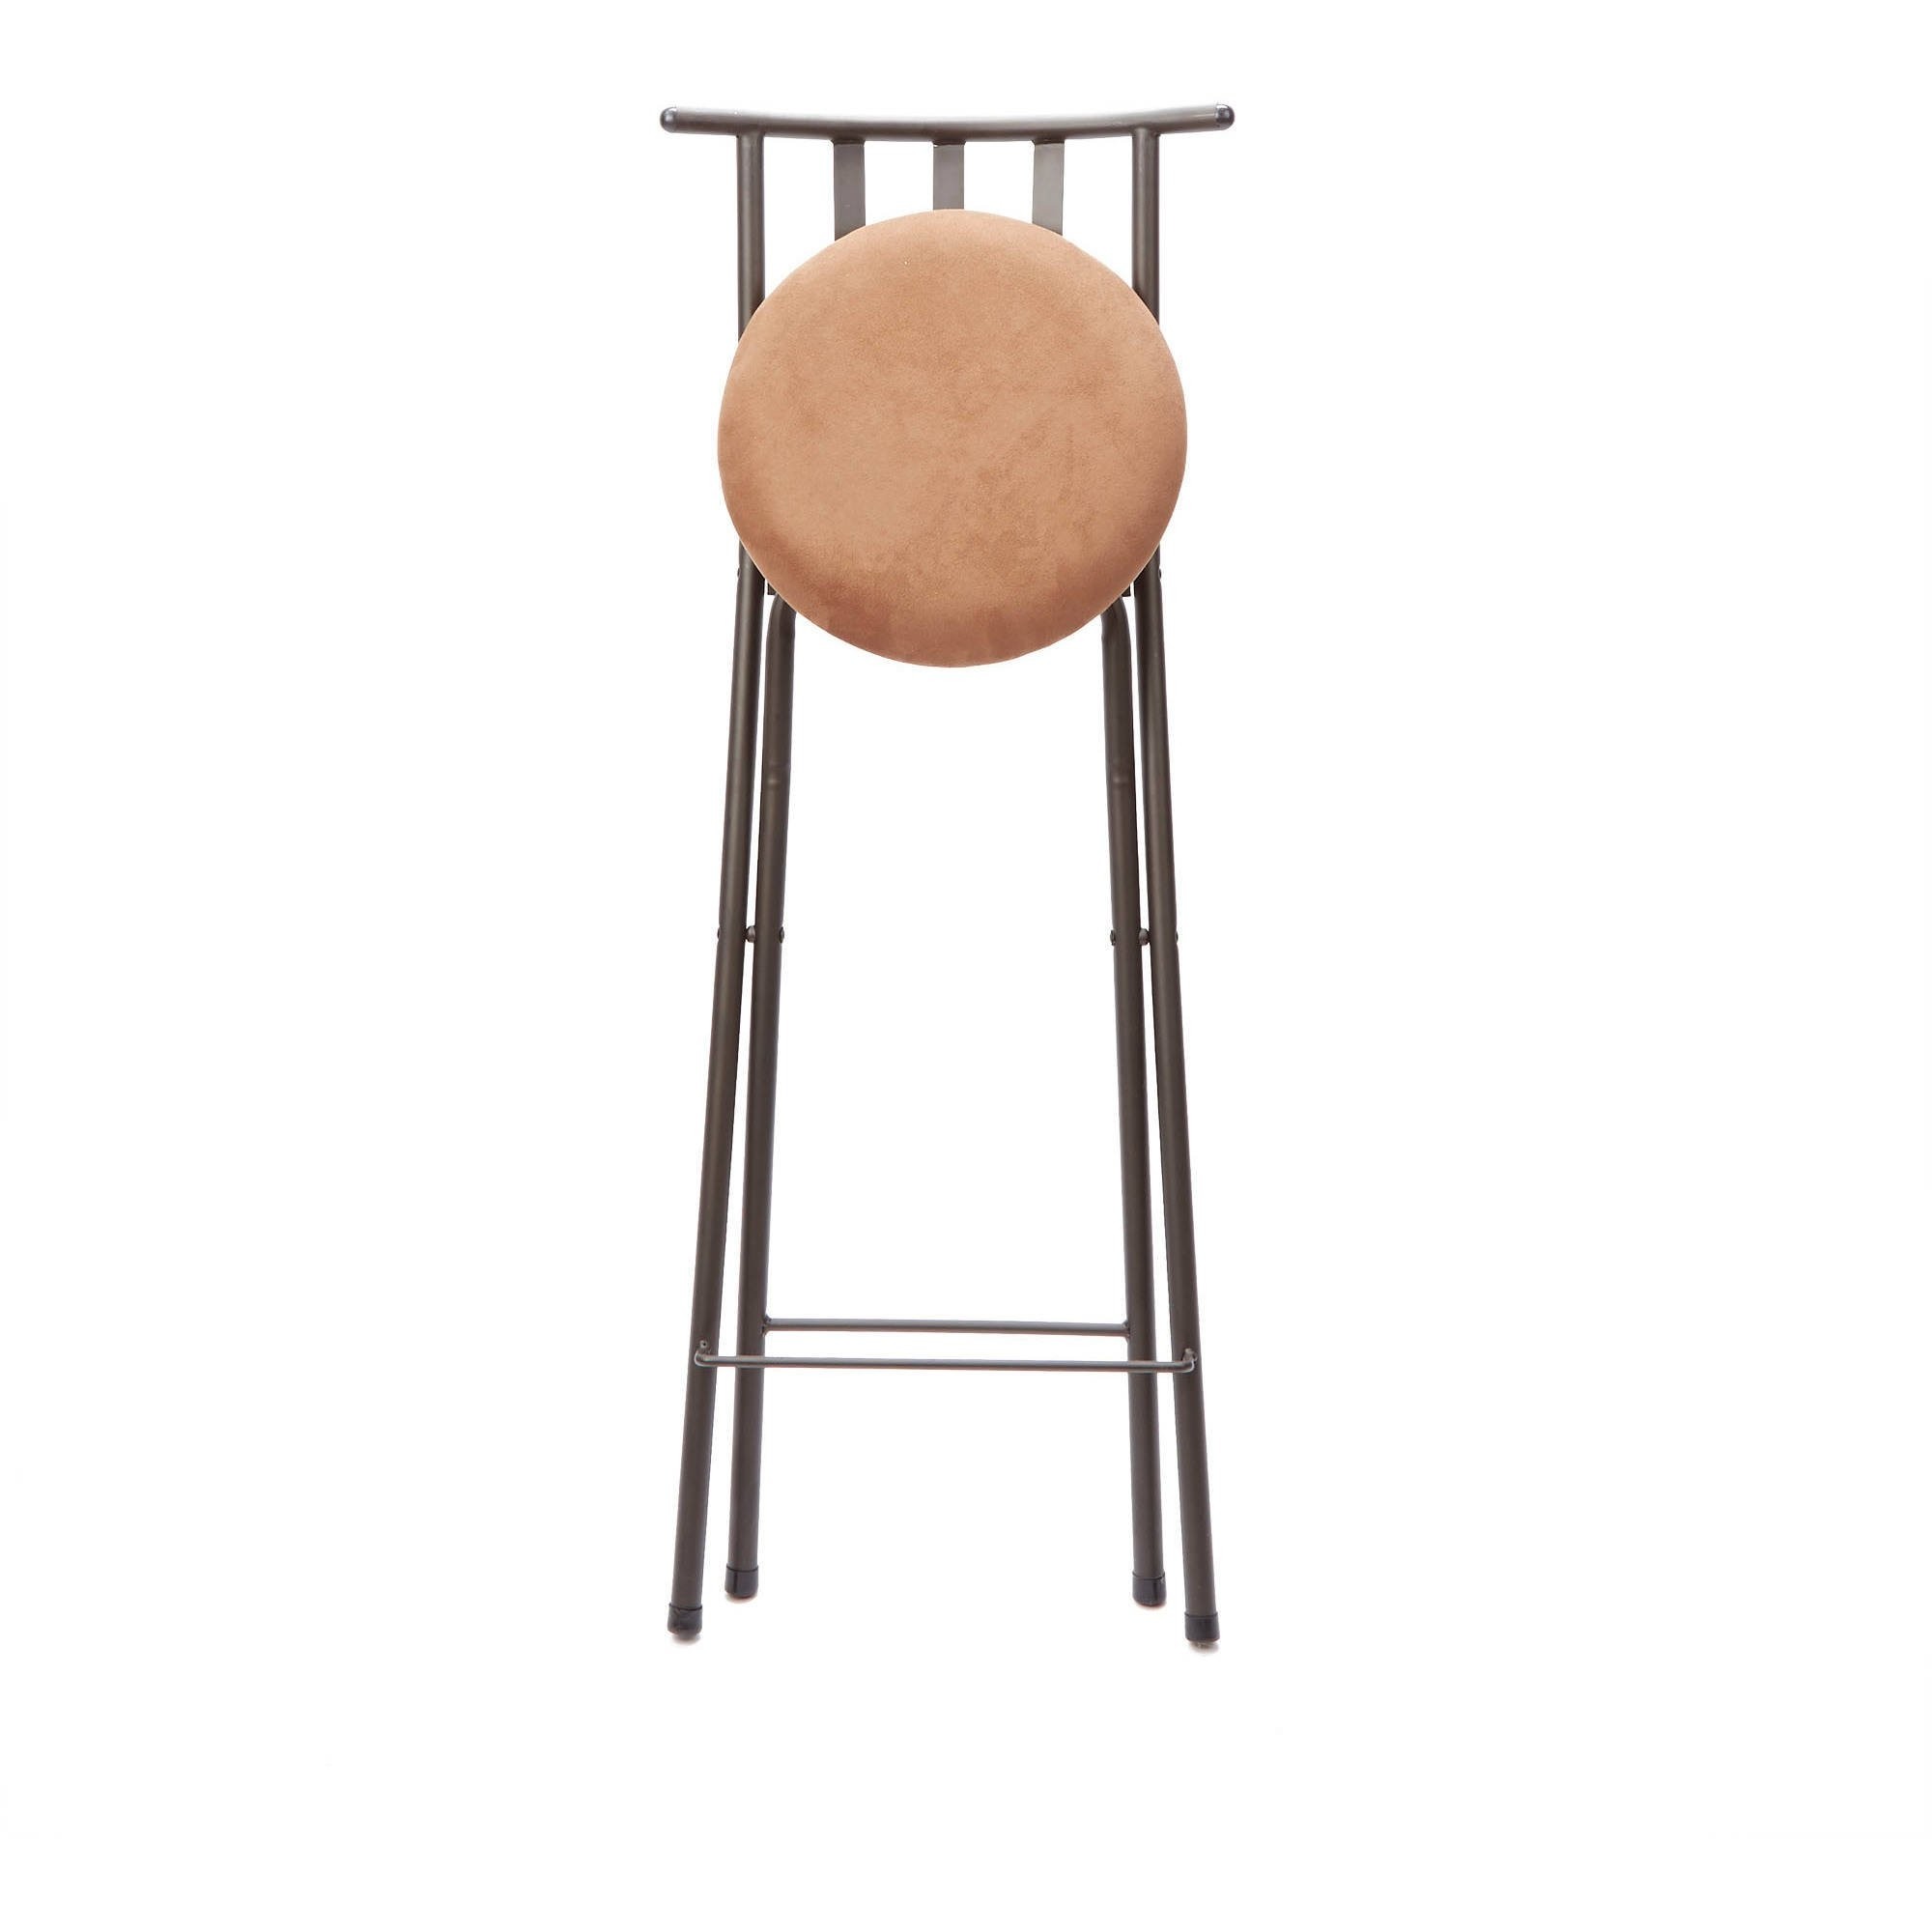 30 inch folding bar stools chair marvelous the